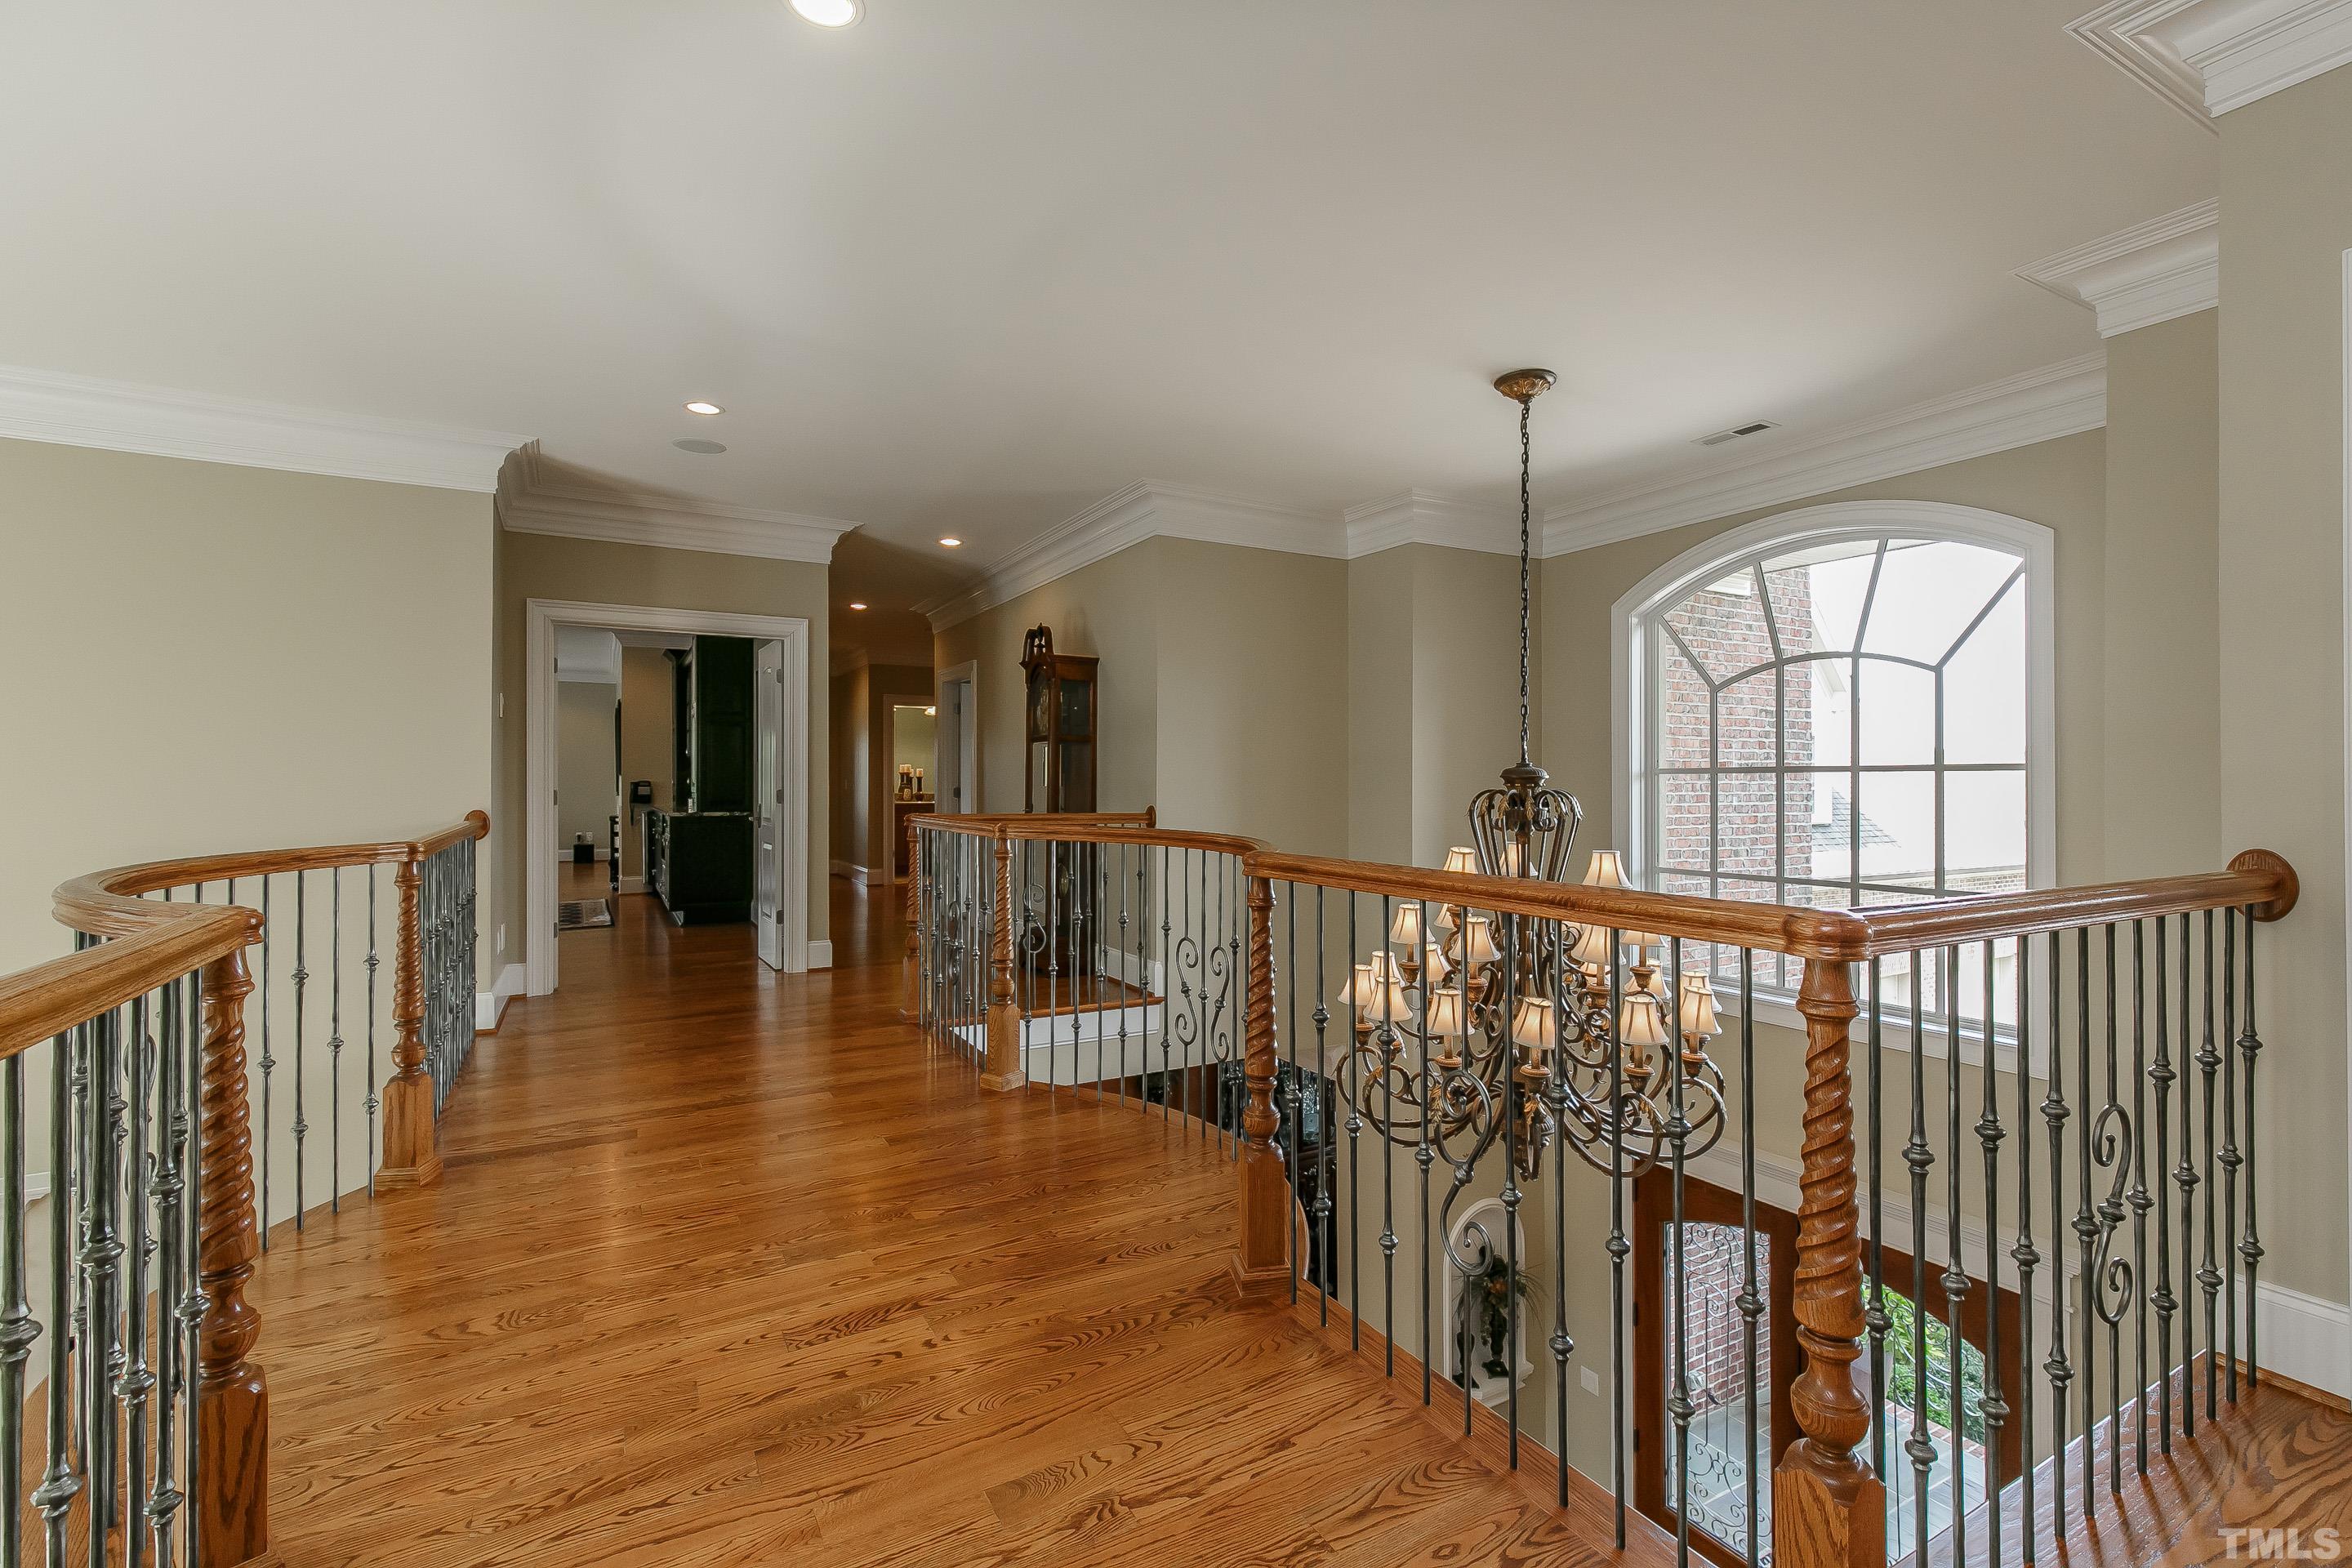 Interior balcony is ornate with stunning views of foyer and living room